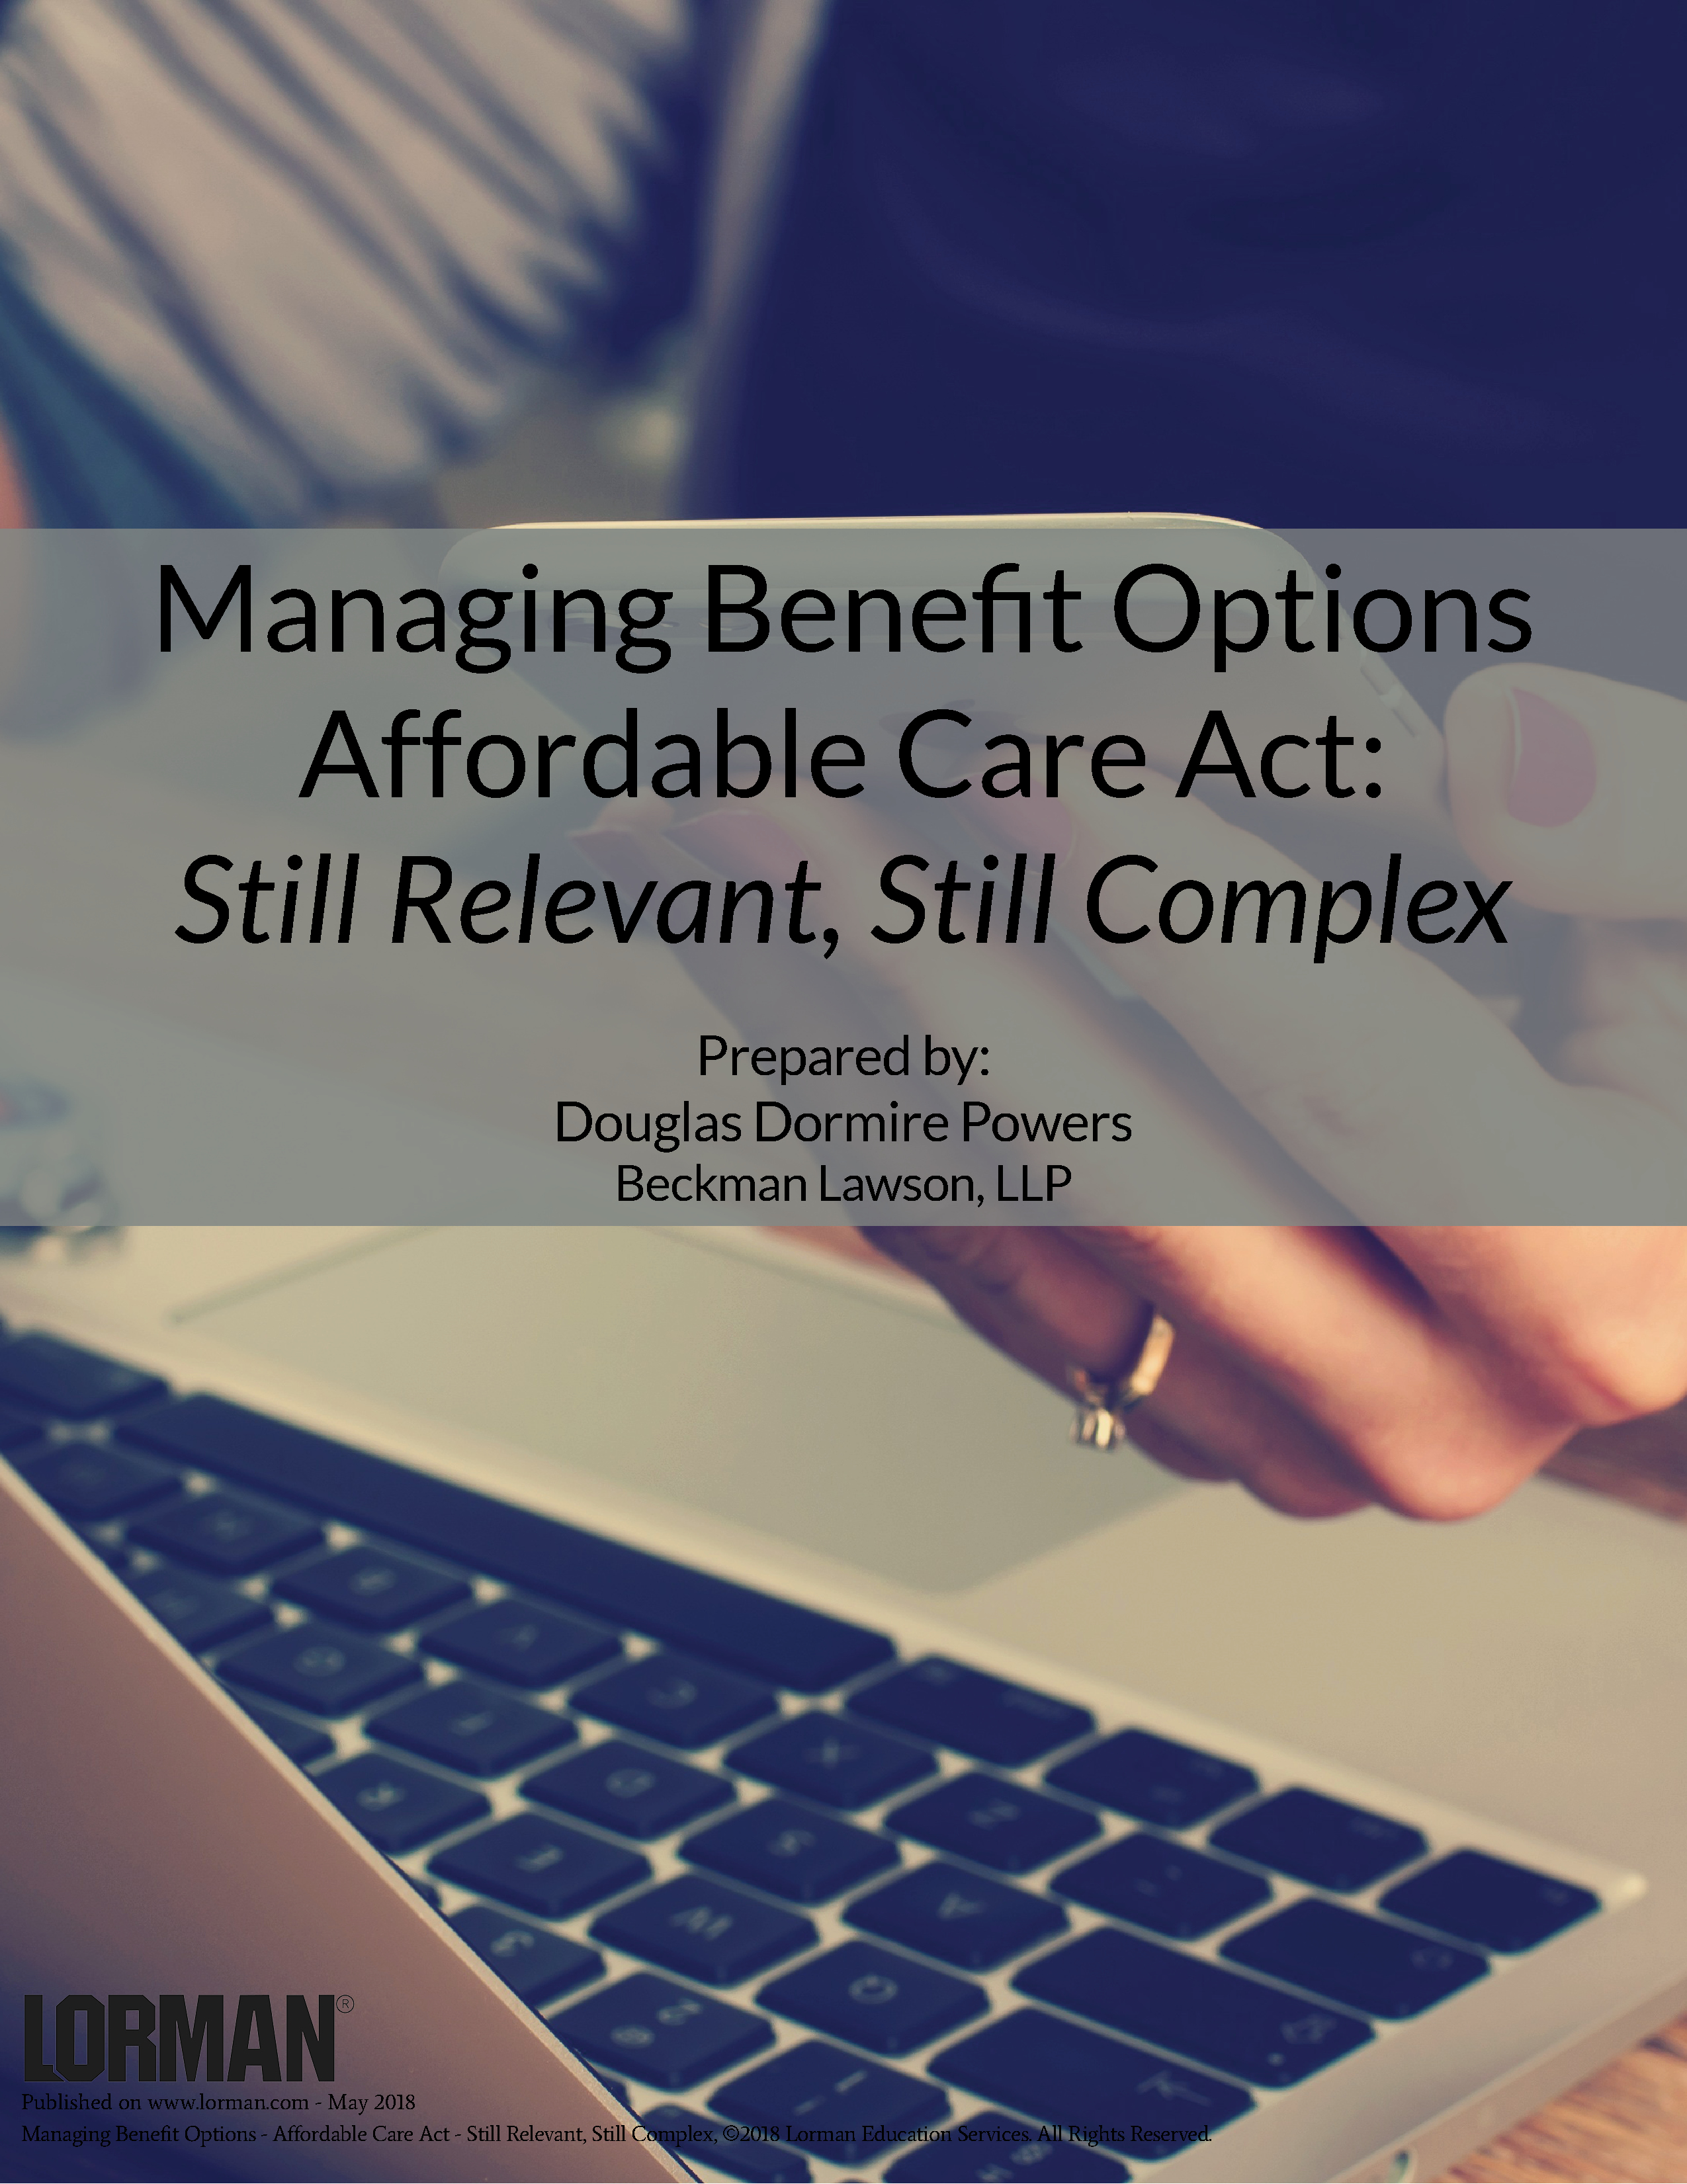 Managing Benefit Options - Affordable Care Act - Still Relevant, Still Complex